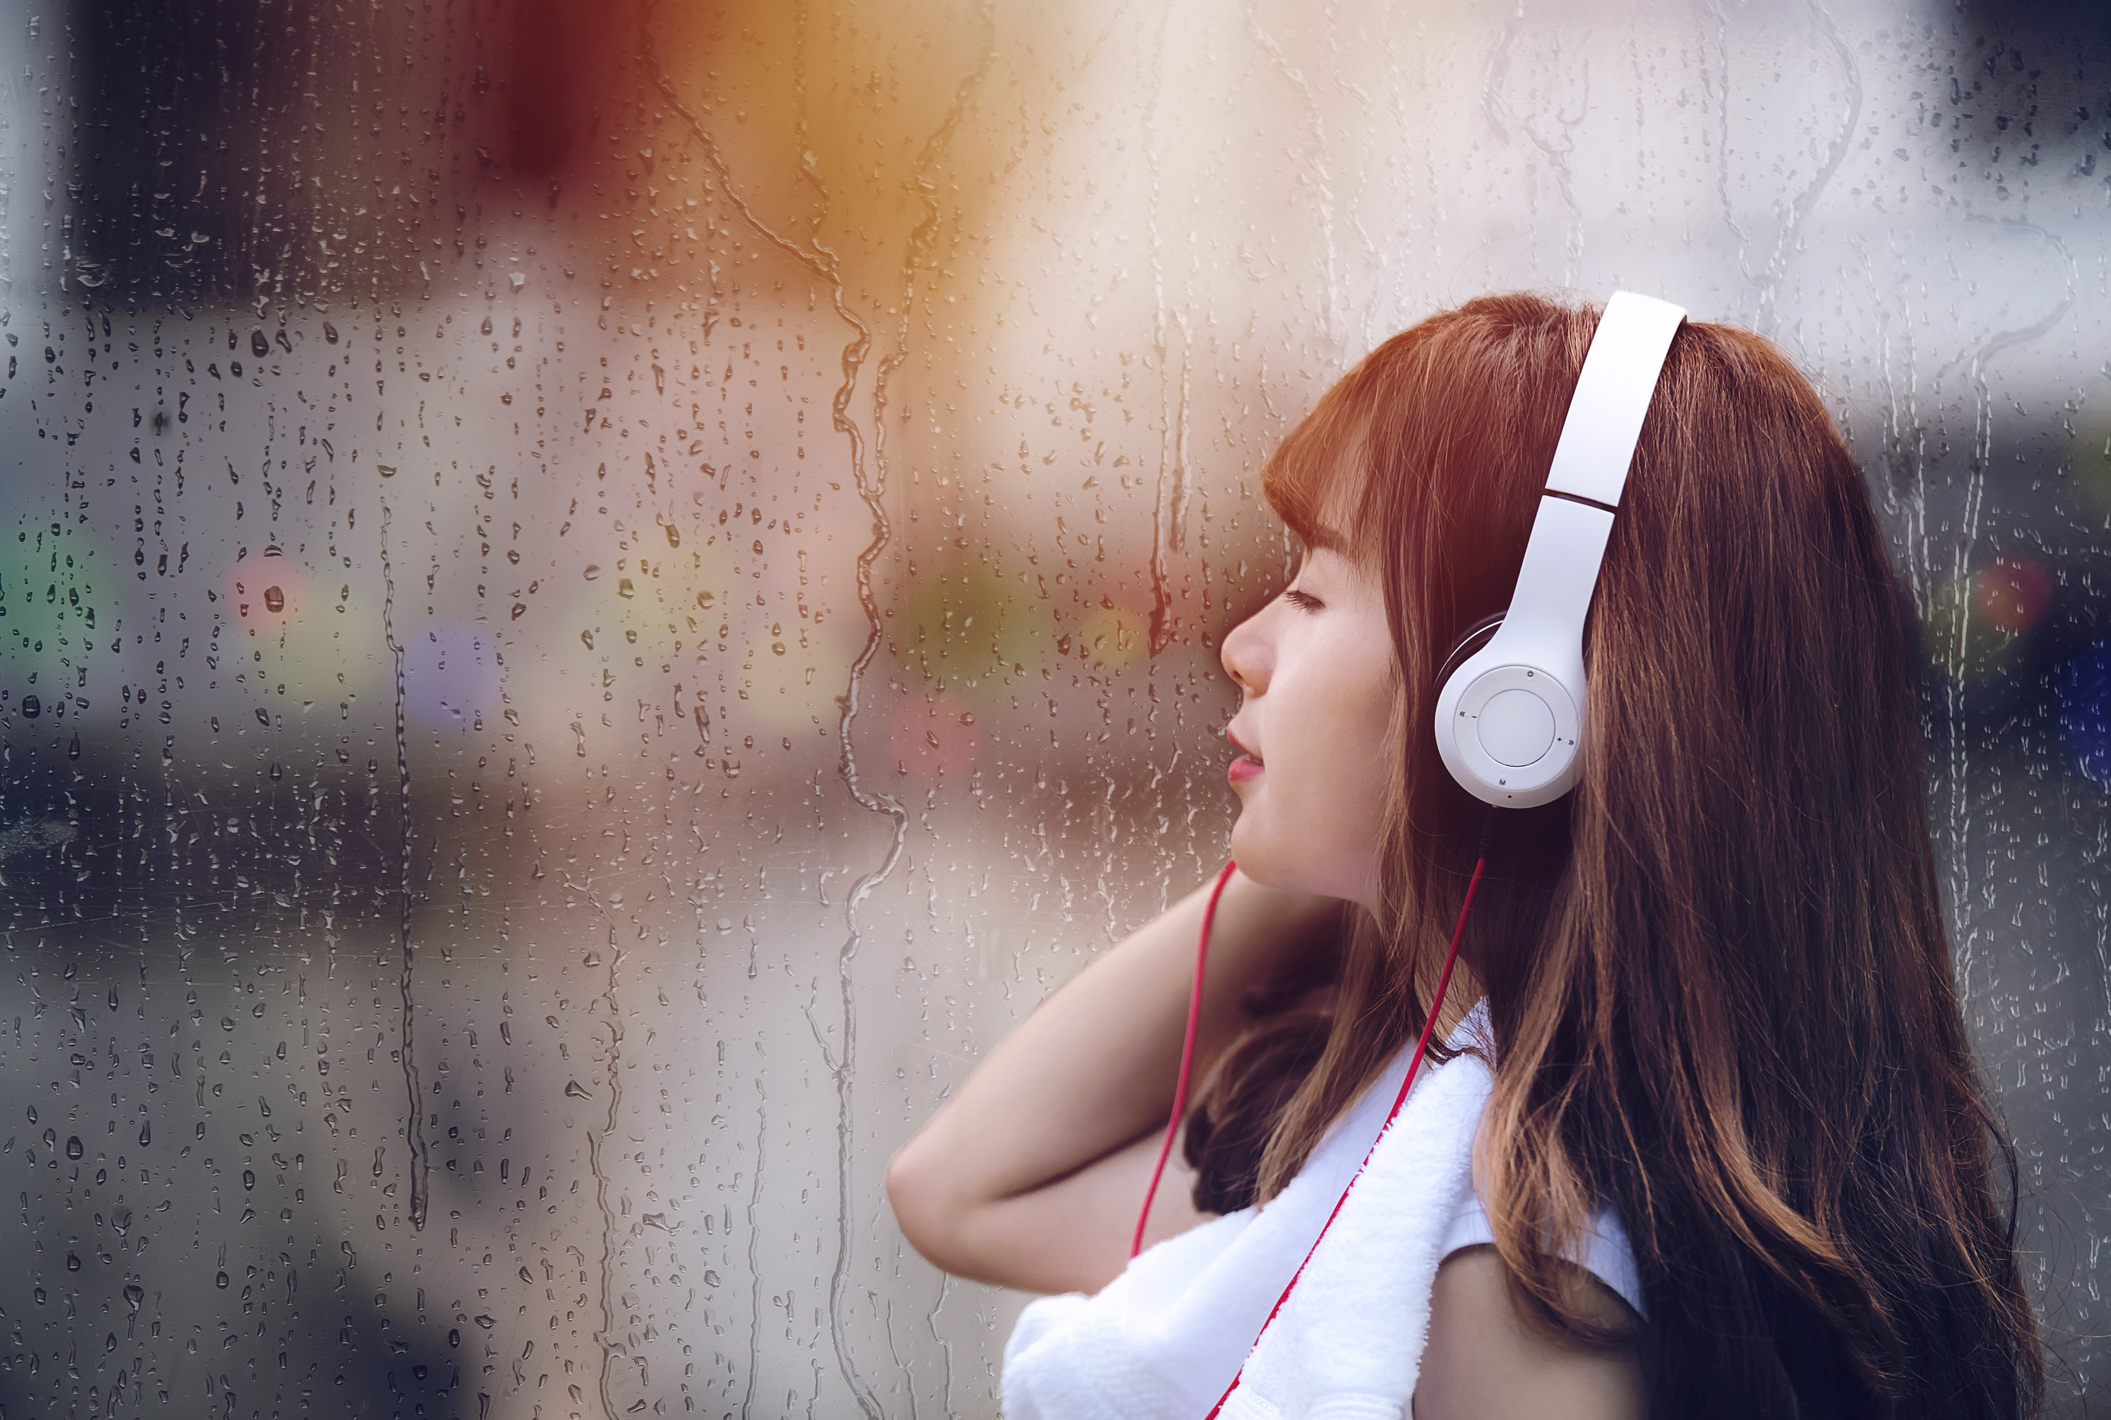 woman with headphones staring out the window during a rainy day